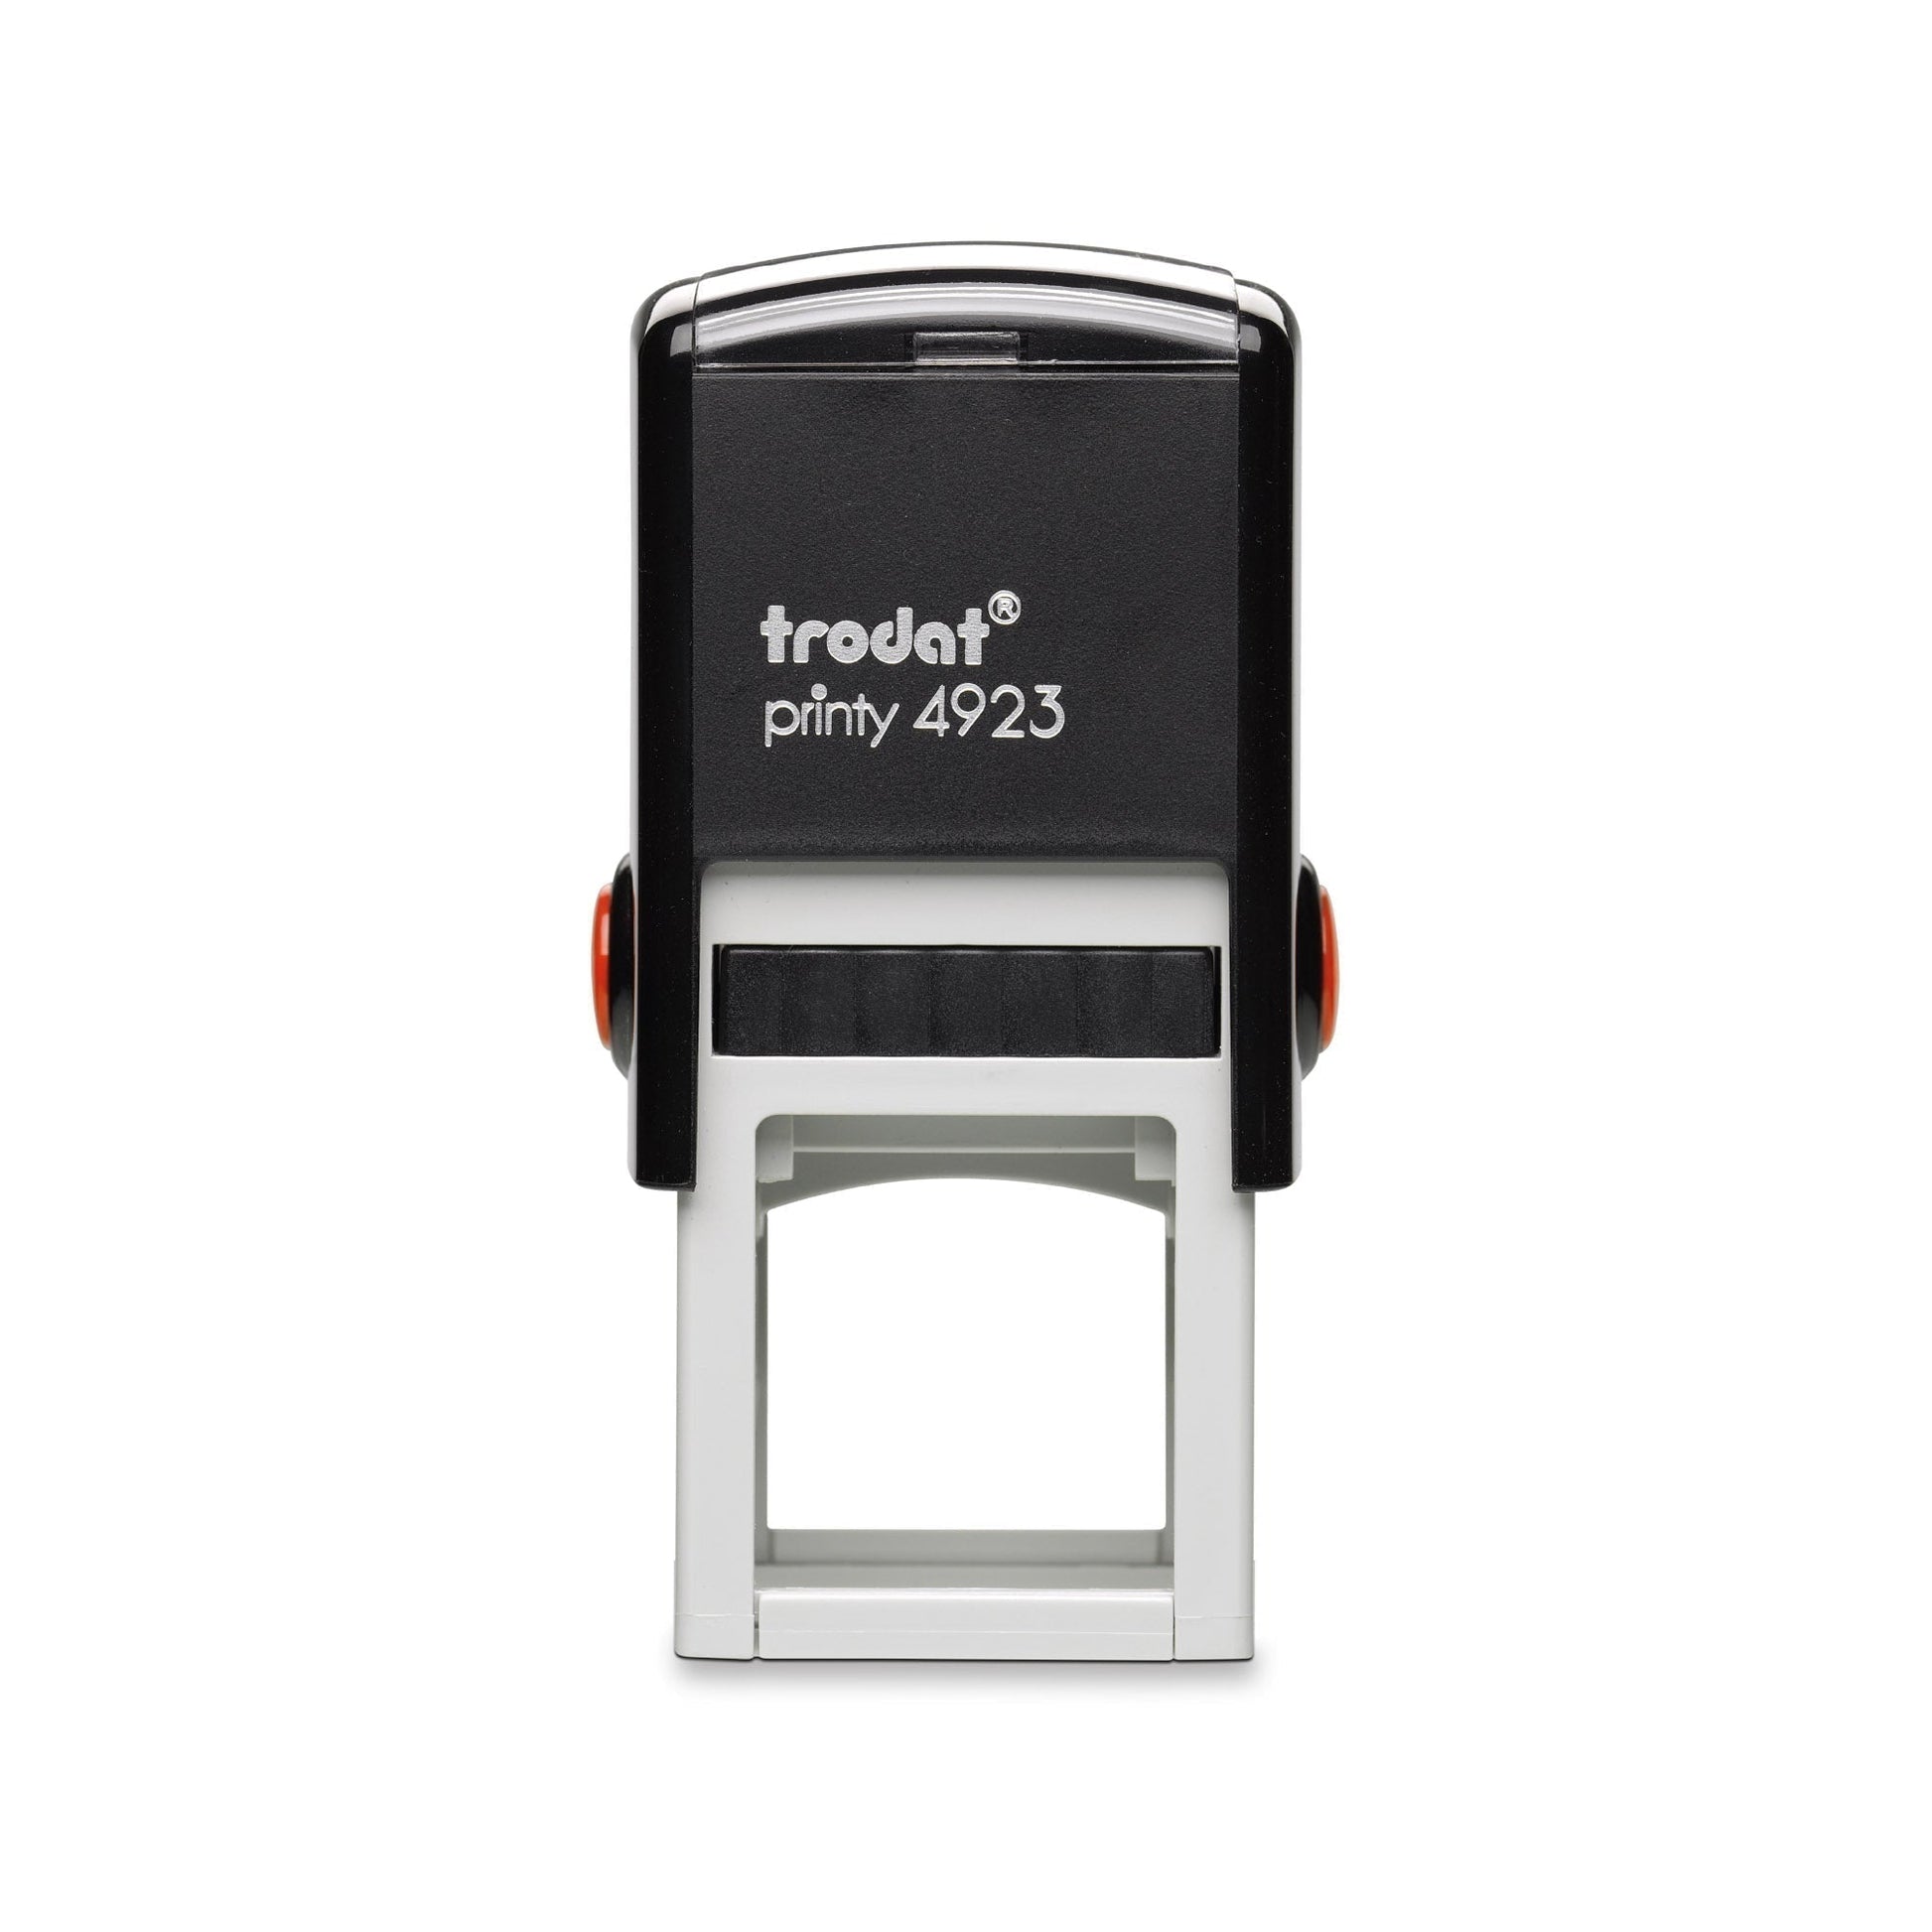 Dealer Serviced With Genuine Parts - Self Inking Rubber Stamp - Trodat 4923 - 28mm x 28mm Impression